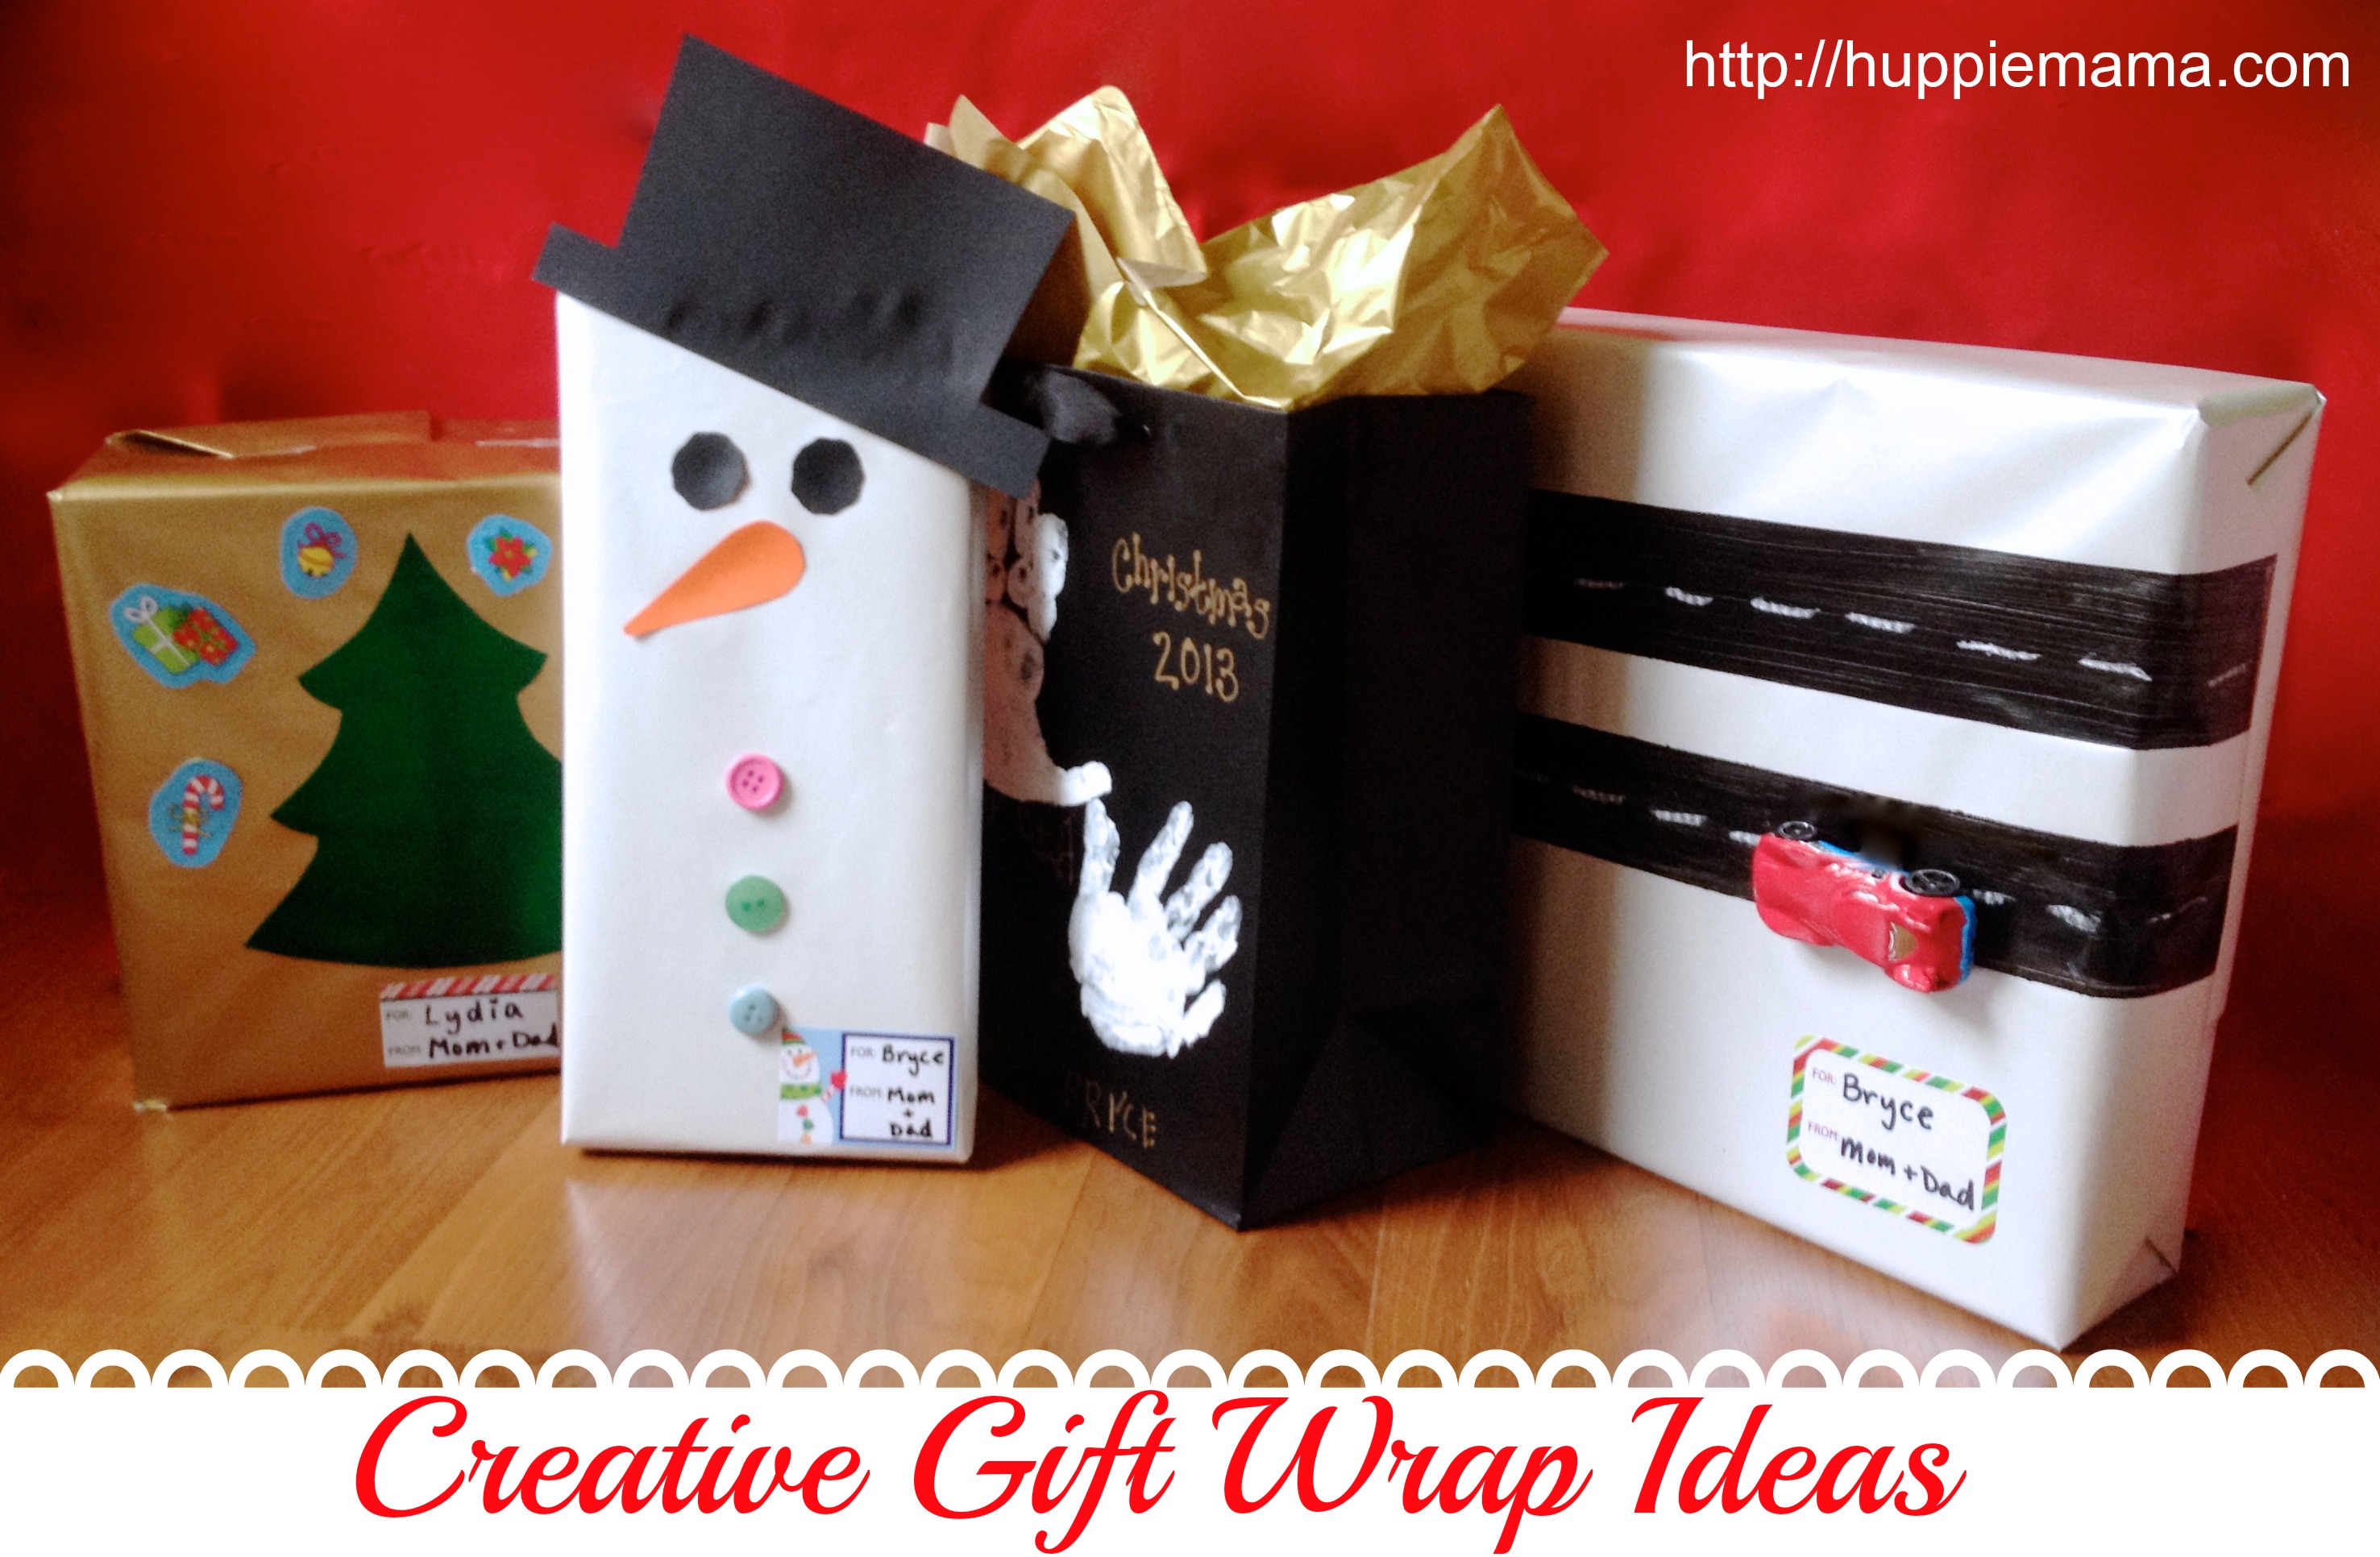 GIFT WRAPPING IDEAS